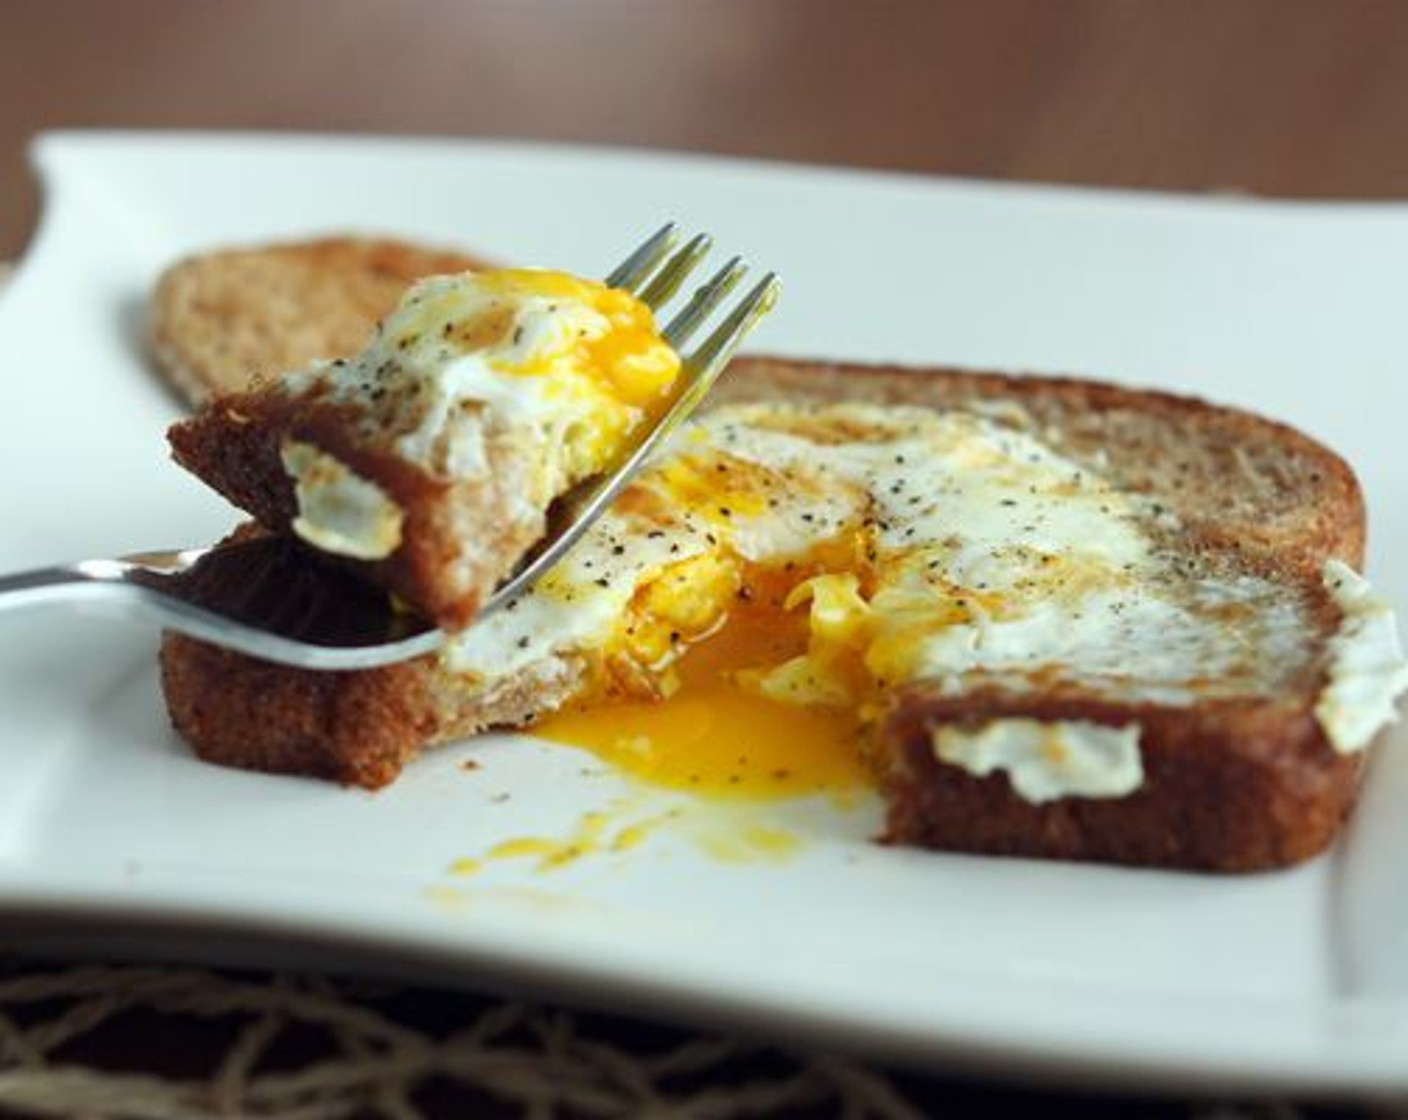 step 6 Lift the bread onto a plate and eat. Use your little center circle to soak up the warm, luscious yolk!